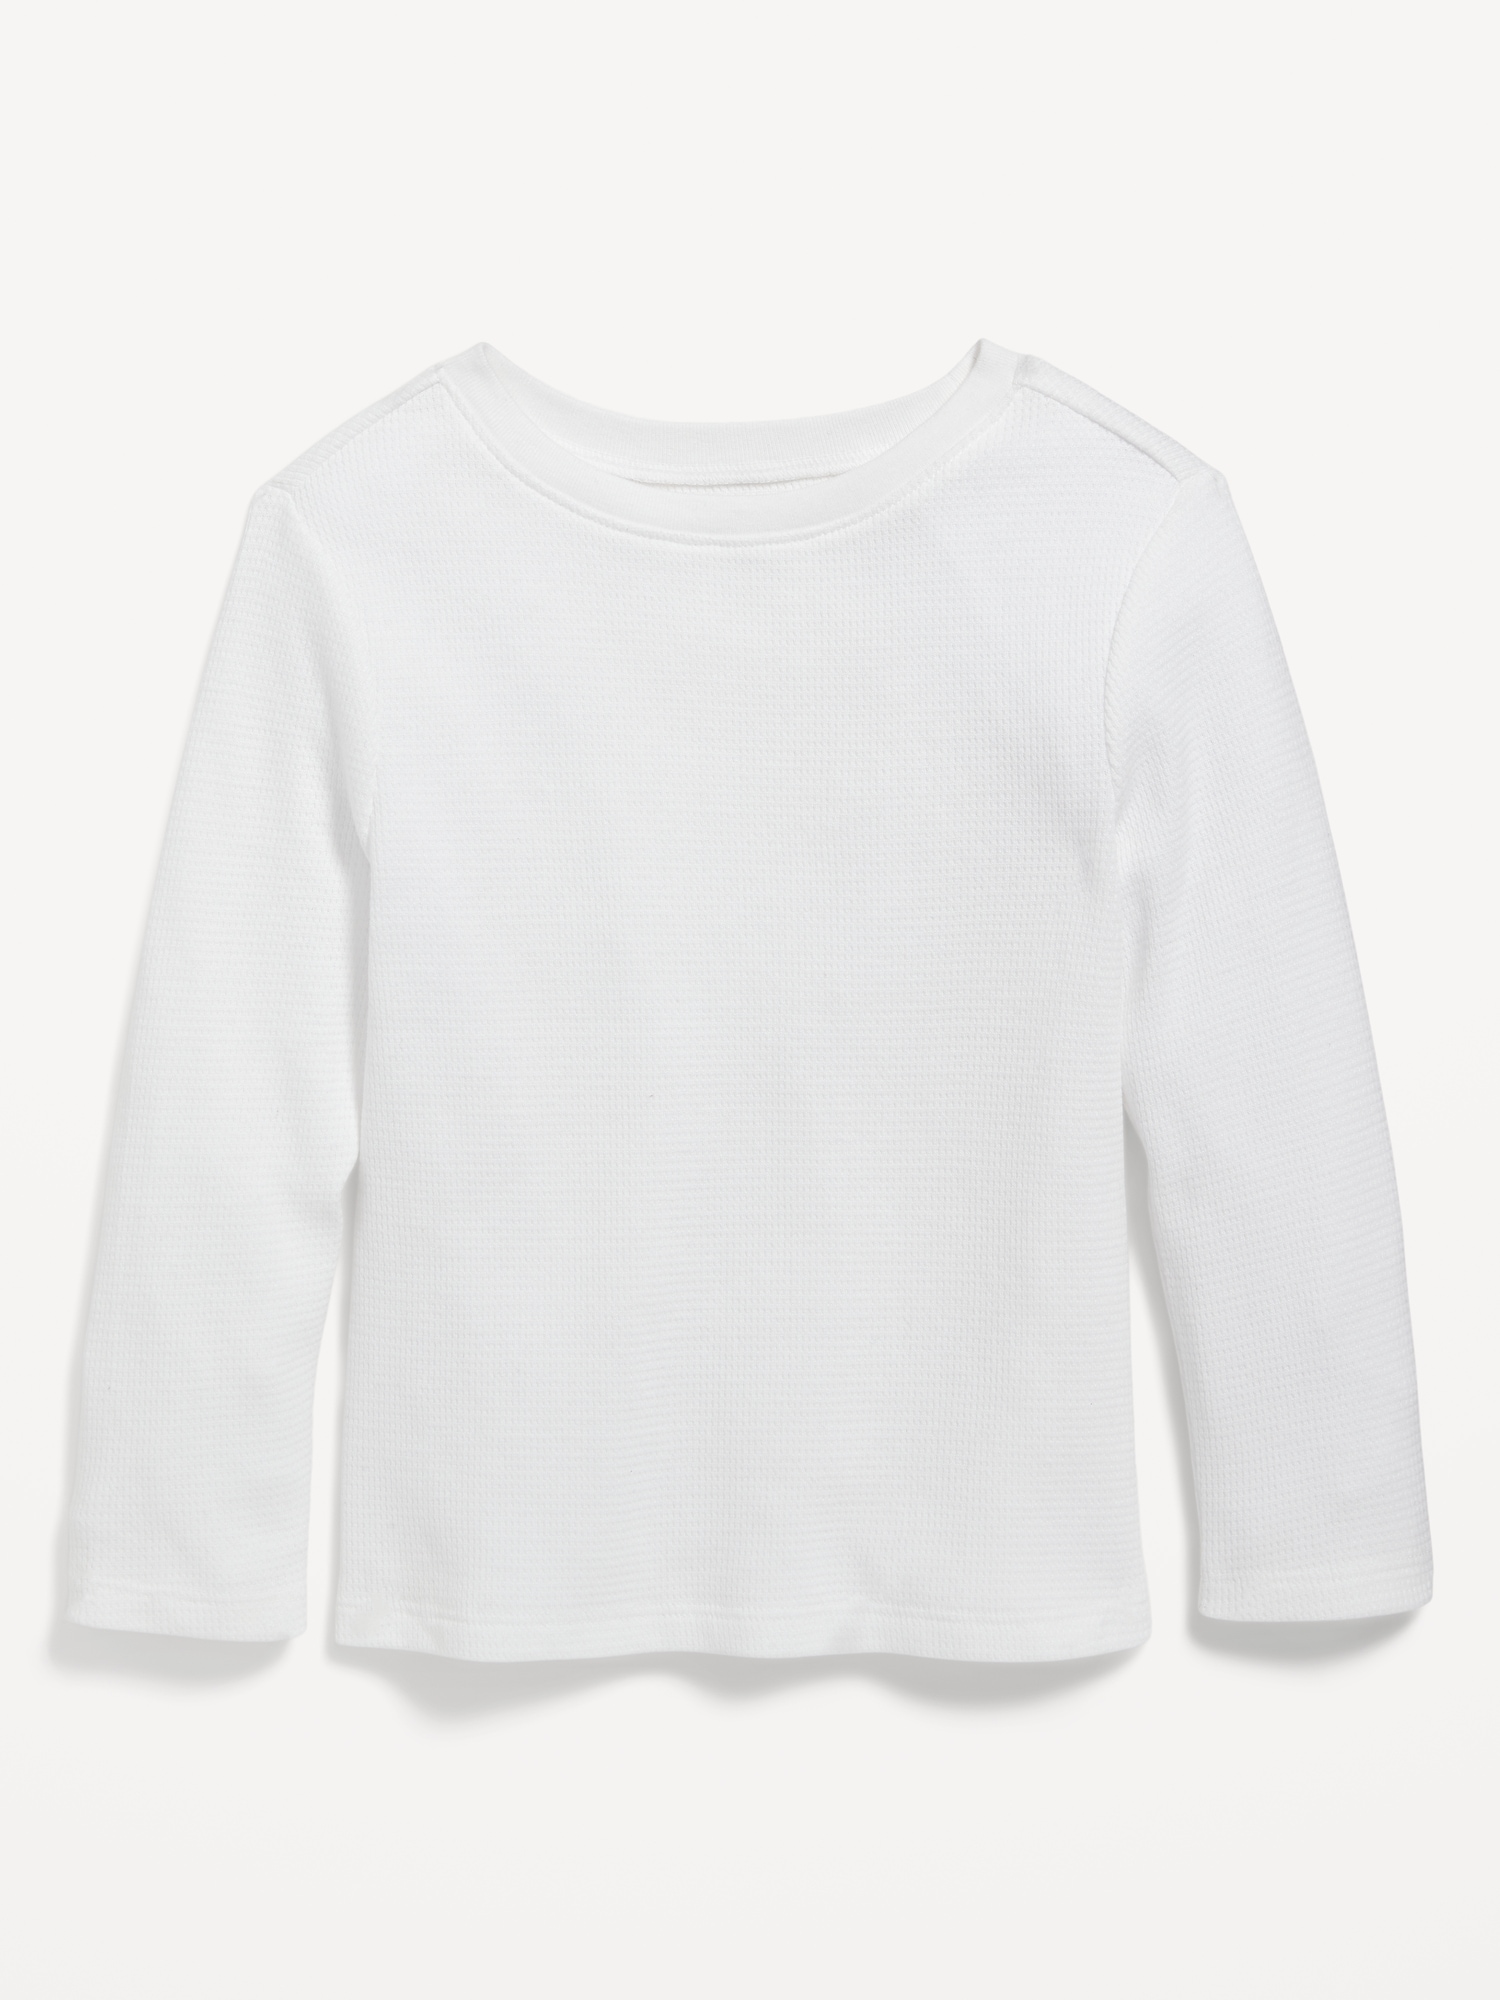 Unisex Long-Sleeve Thermal-Knit T-Shirt for Toddler